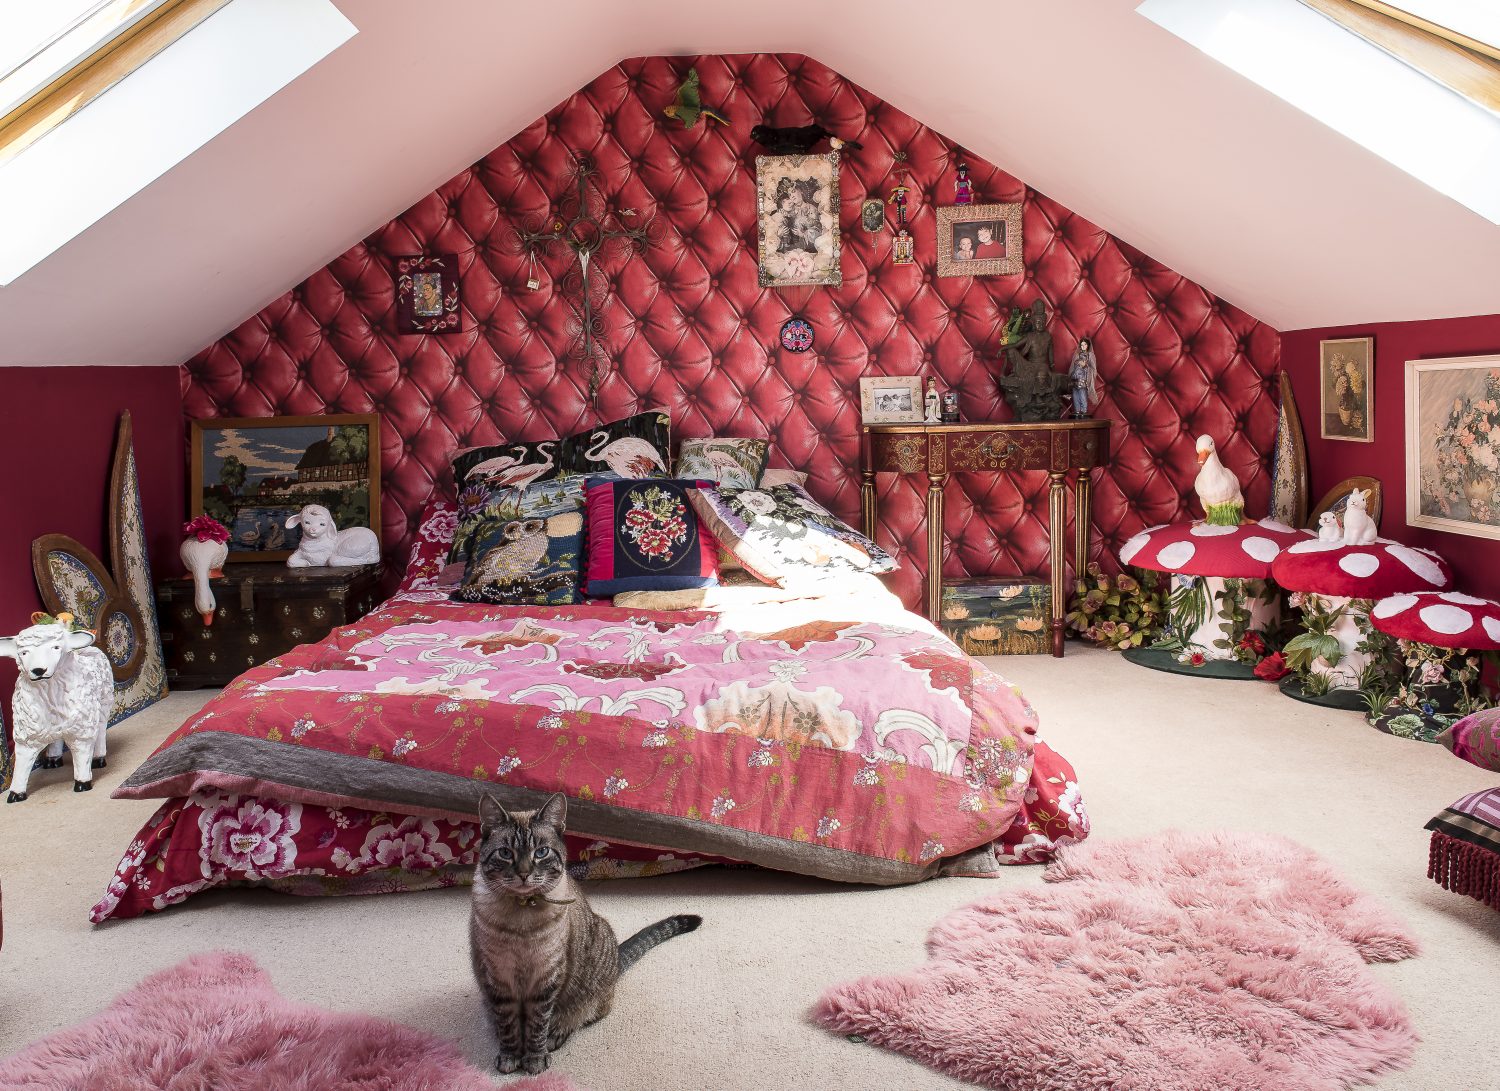 : Annemarie made the mushrooms for the attic coversion which she has recently decorated as a bedroom for her granddaughter. The wallpaper is by Couture Deco. Doris the cat stands guard